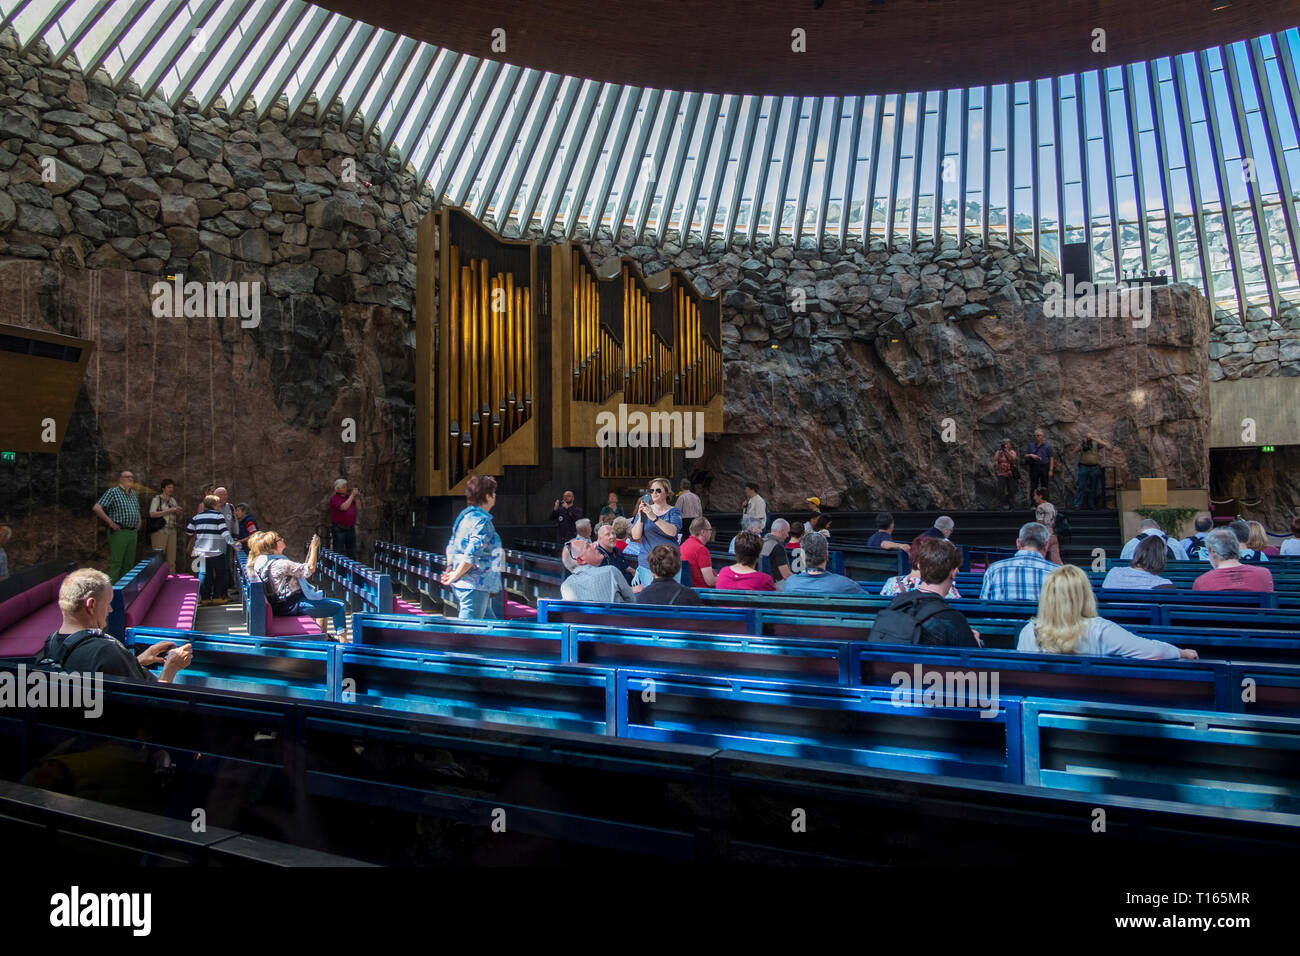 Interior view of the partially underground, rock-carved Temppeliaukio church in Helsinki, Finland. The Lutheran church has a natural appearance. Stock Photo